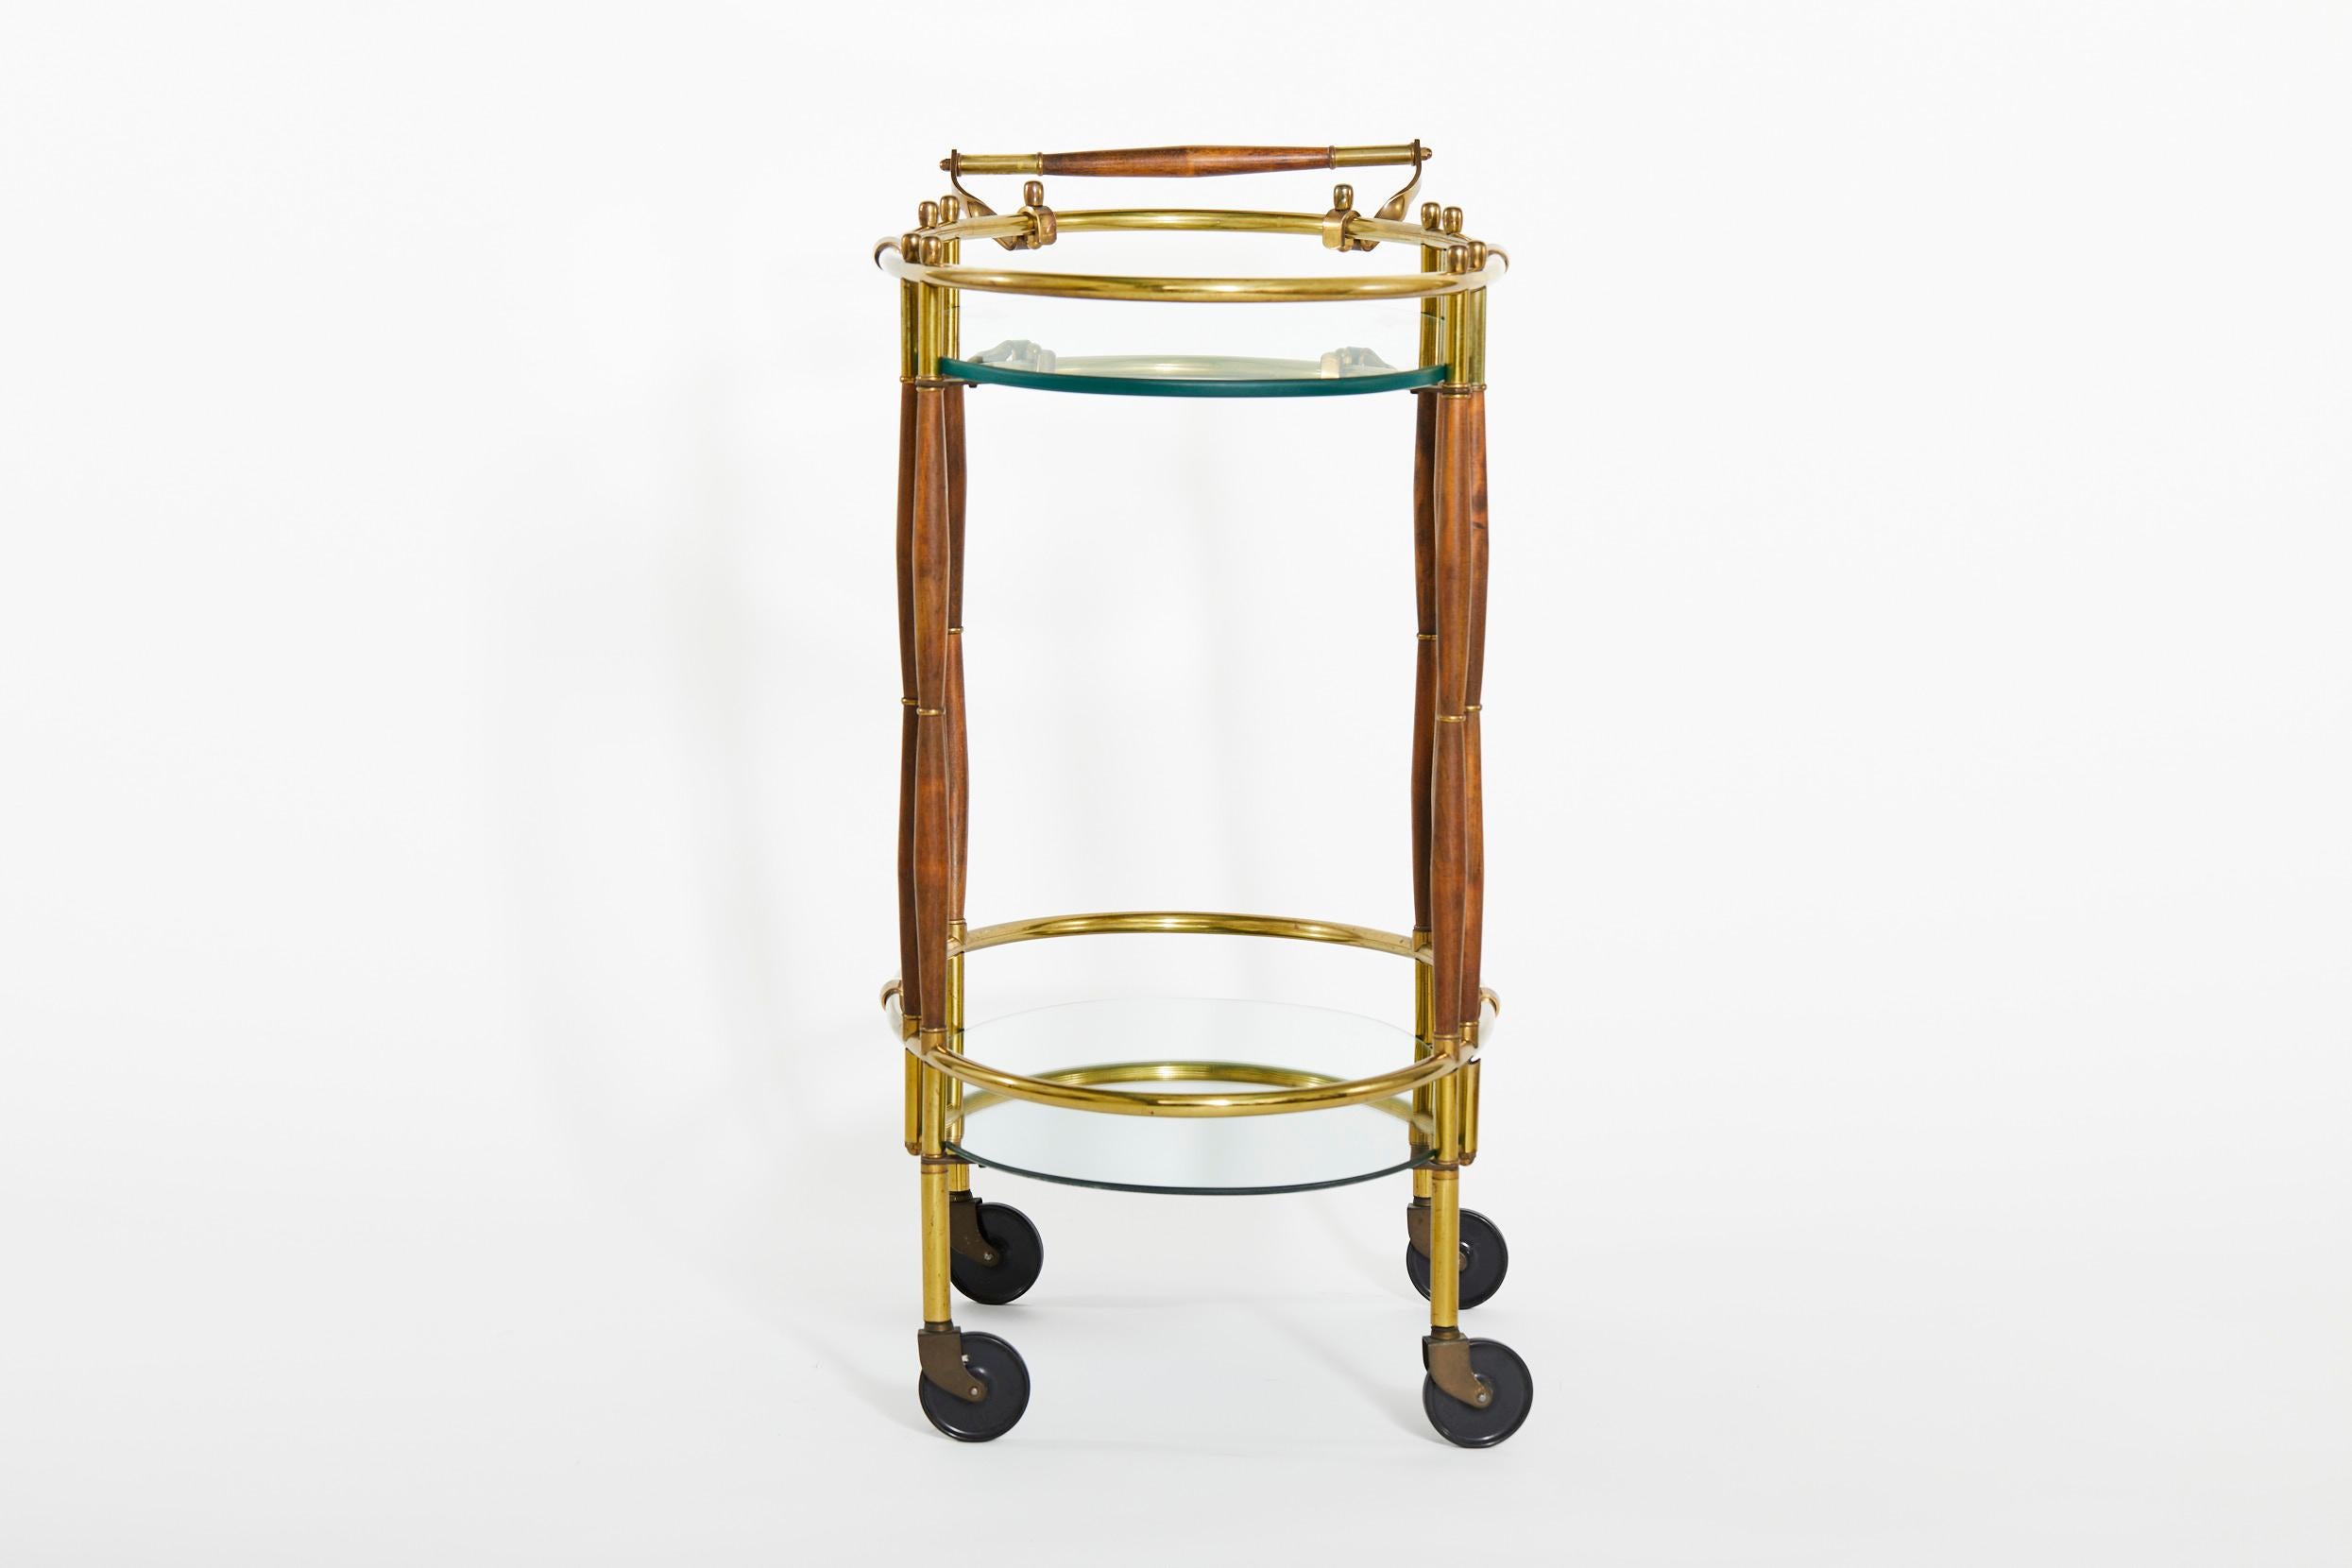 Hand-Carved Mid-20th Century Brass / Wood Design Bar Cart